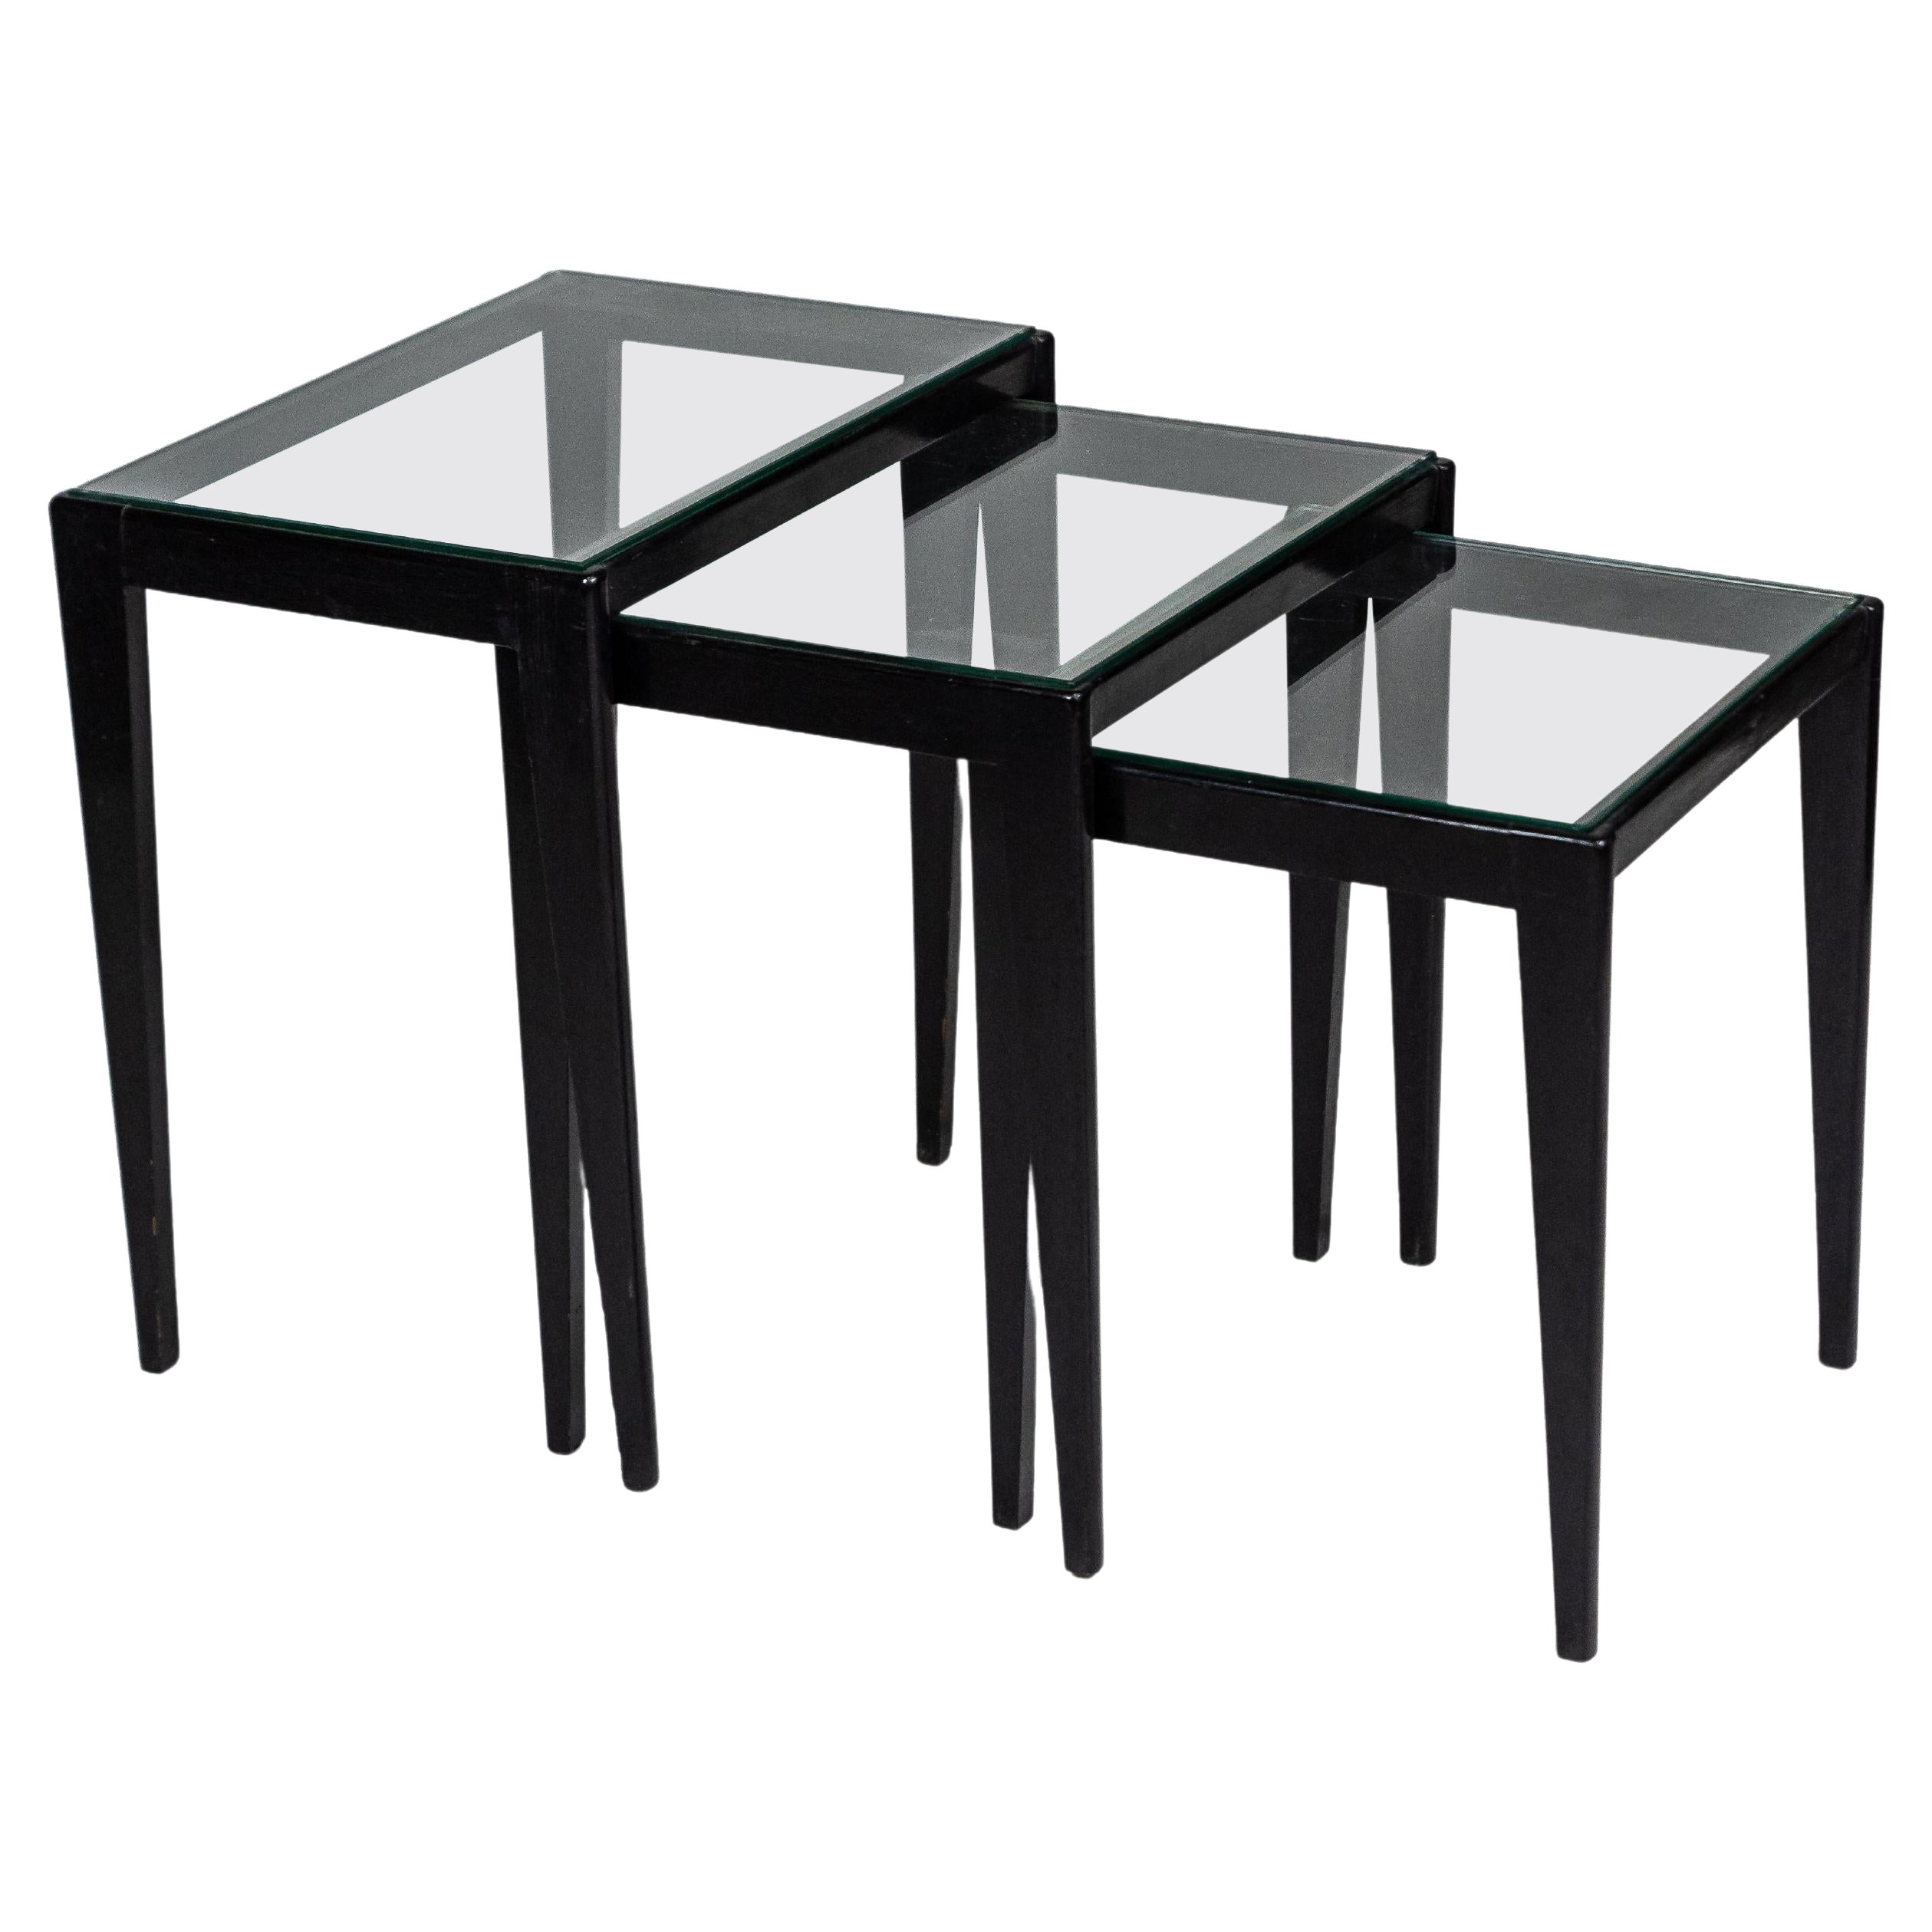 Giuseppe Scapinelli, Nesting Tables, 1960 For Sale